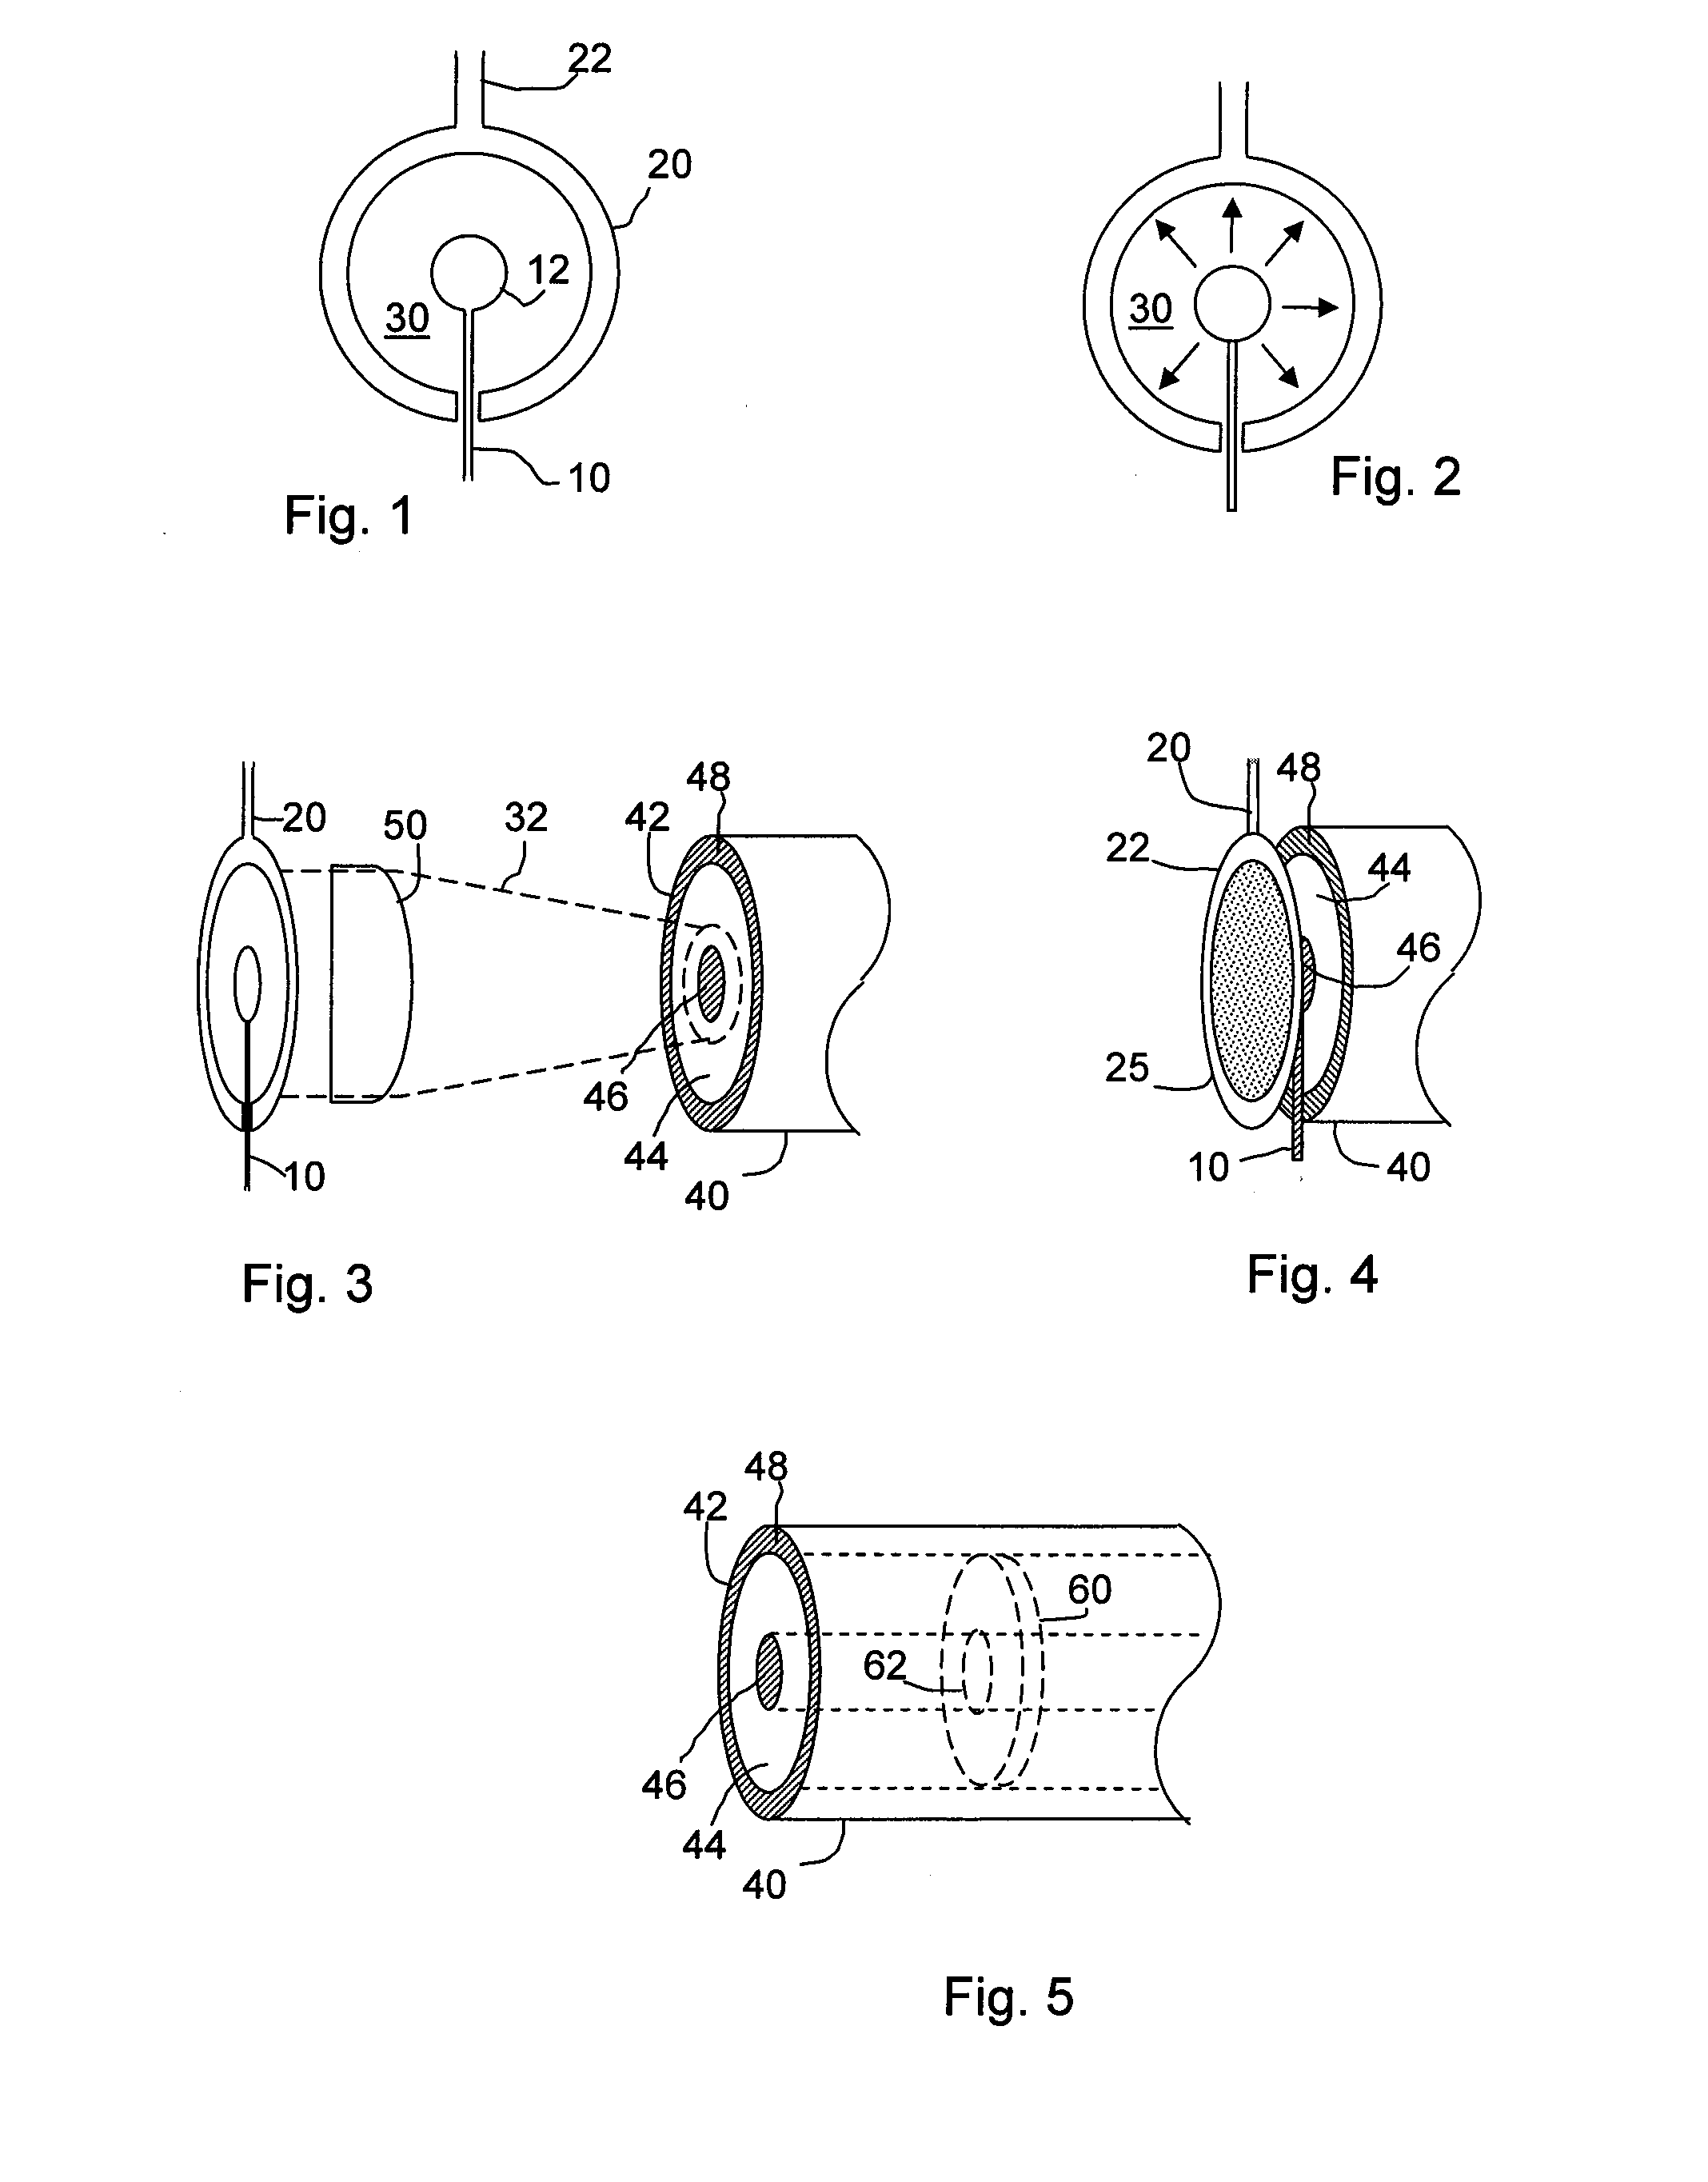 Method for Coupling Terahertz Pulses Into a Coaxial Waveguide